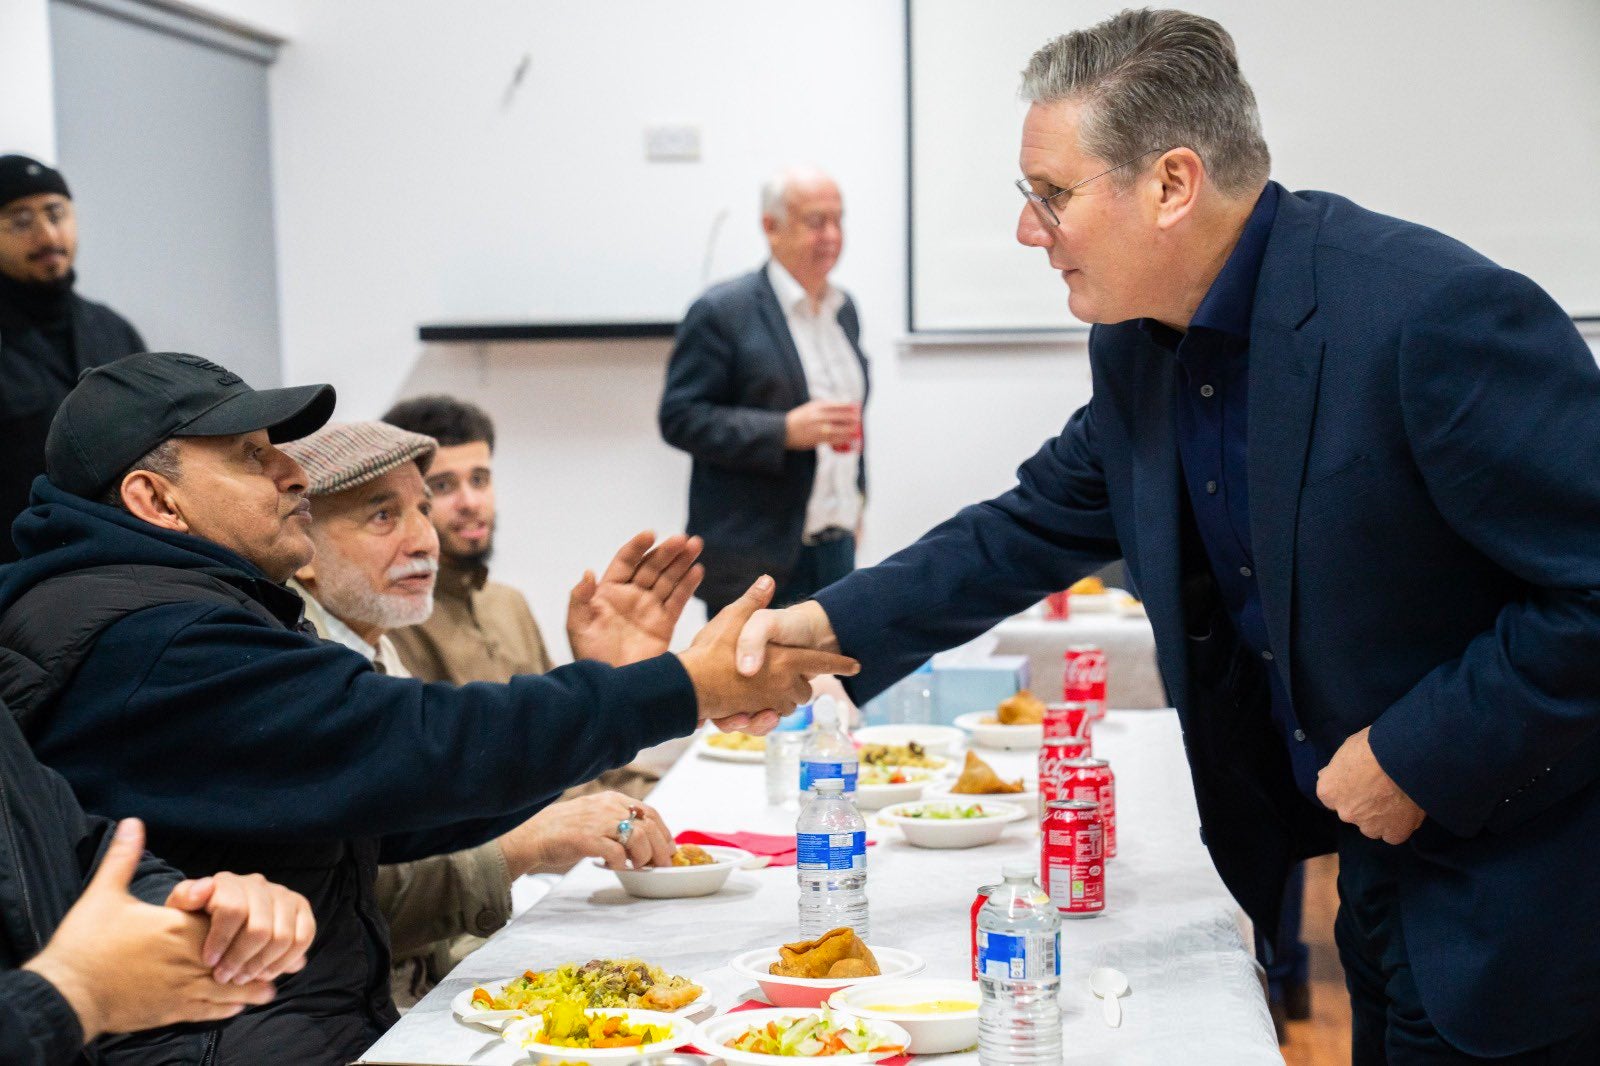 Keir Starmer visited the South Wales Islamic Centre mosque last weekend